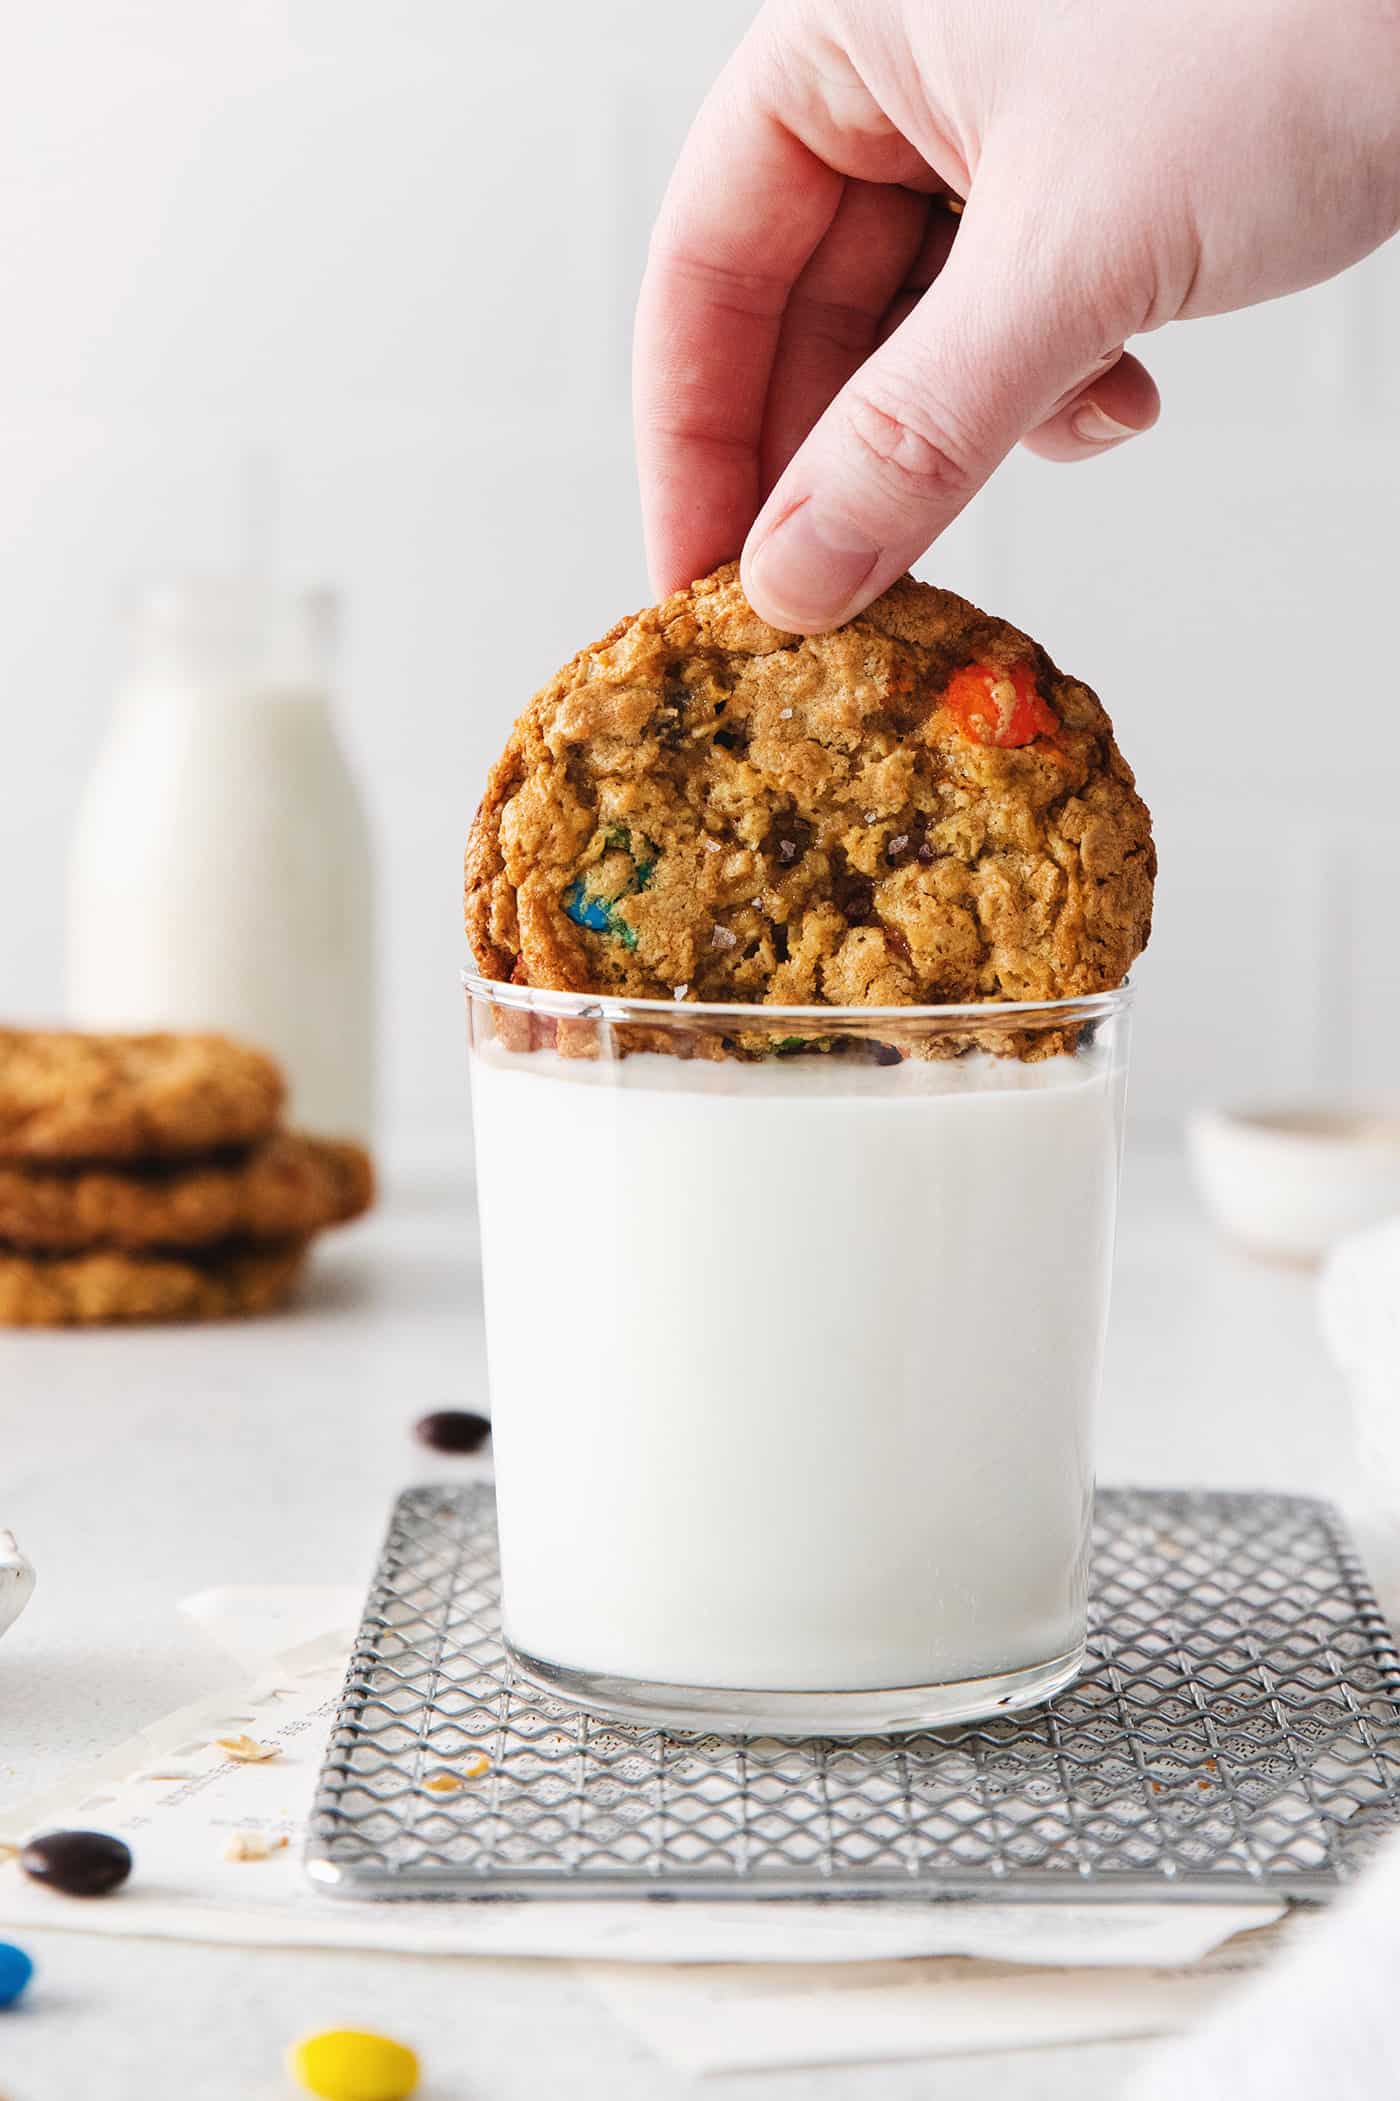 A hand dipping a monster cookie into a glass of milk